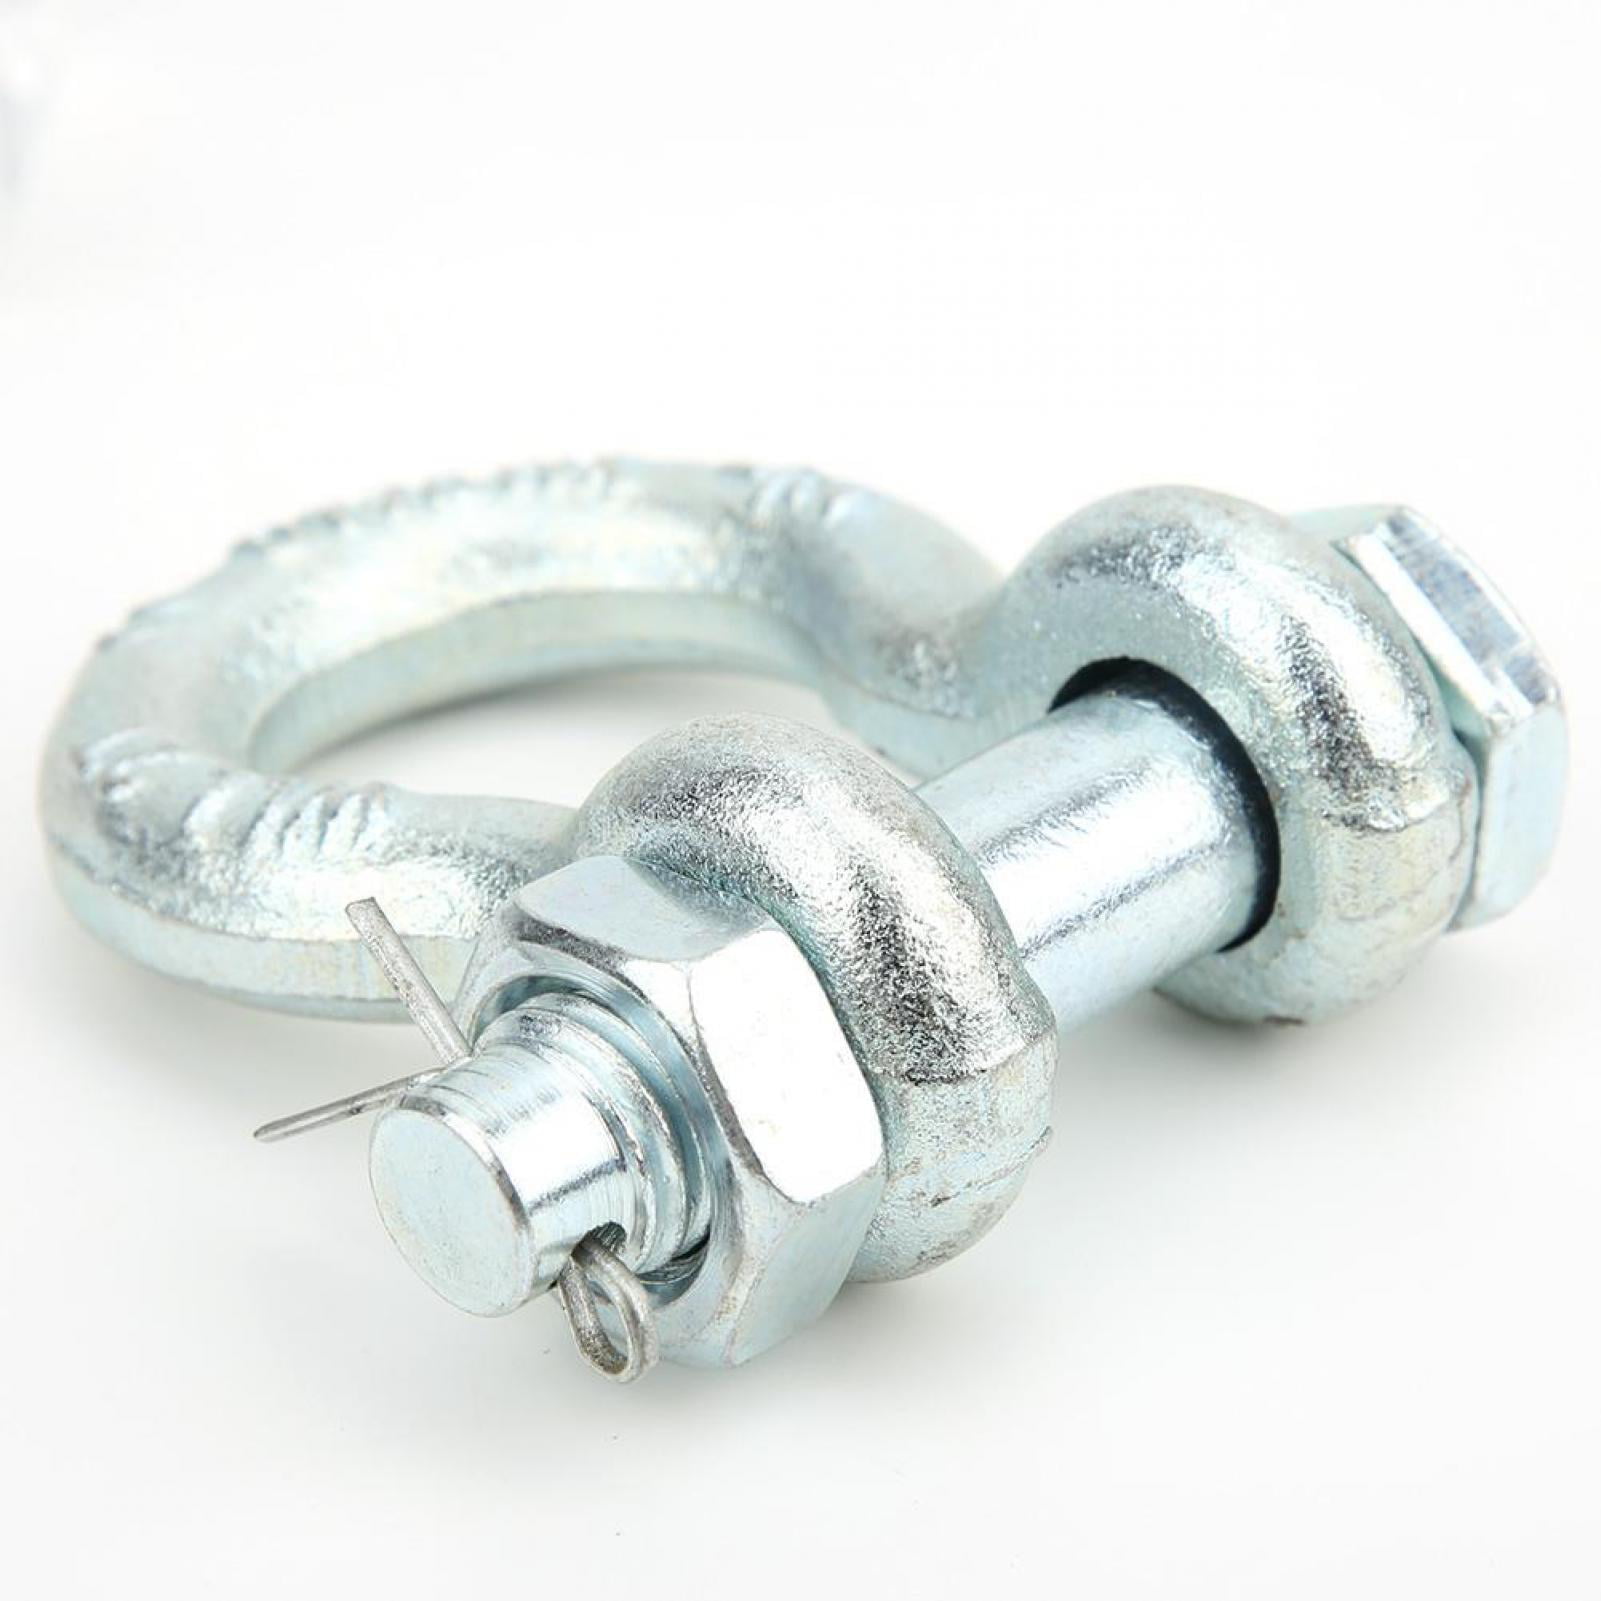 2T 2pcs G2130 Anchor Shackle Alloy Steel Heavy Duty Steel Bow Type with Nut Ship Lifting Machine Parts